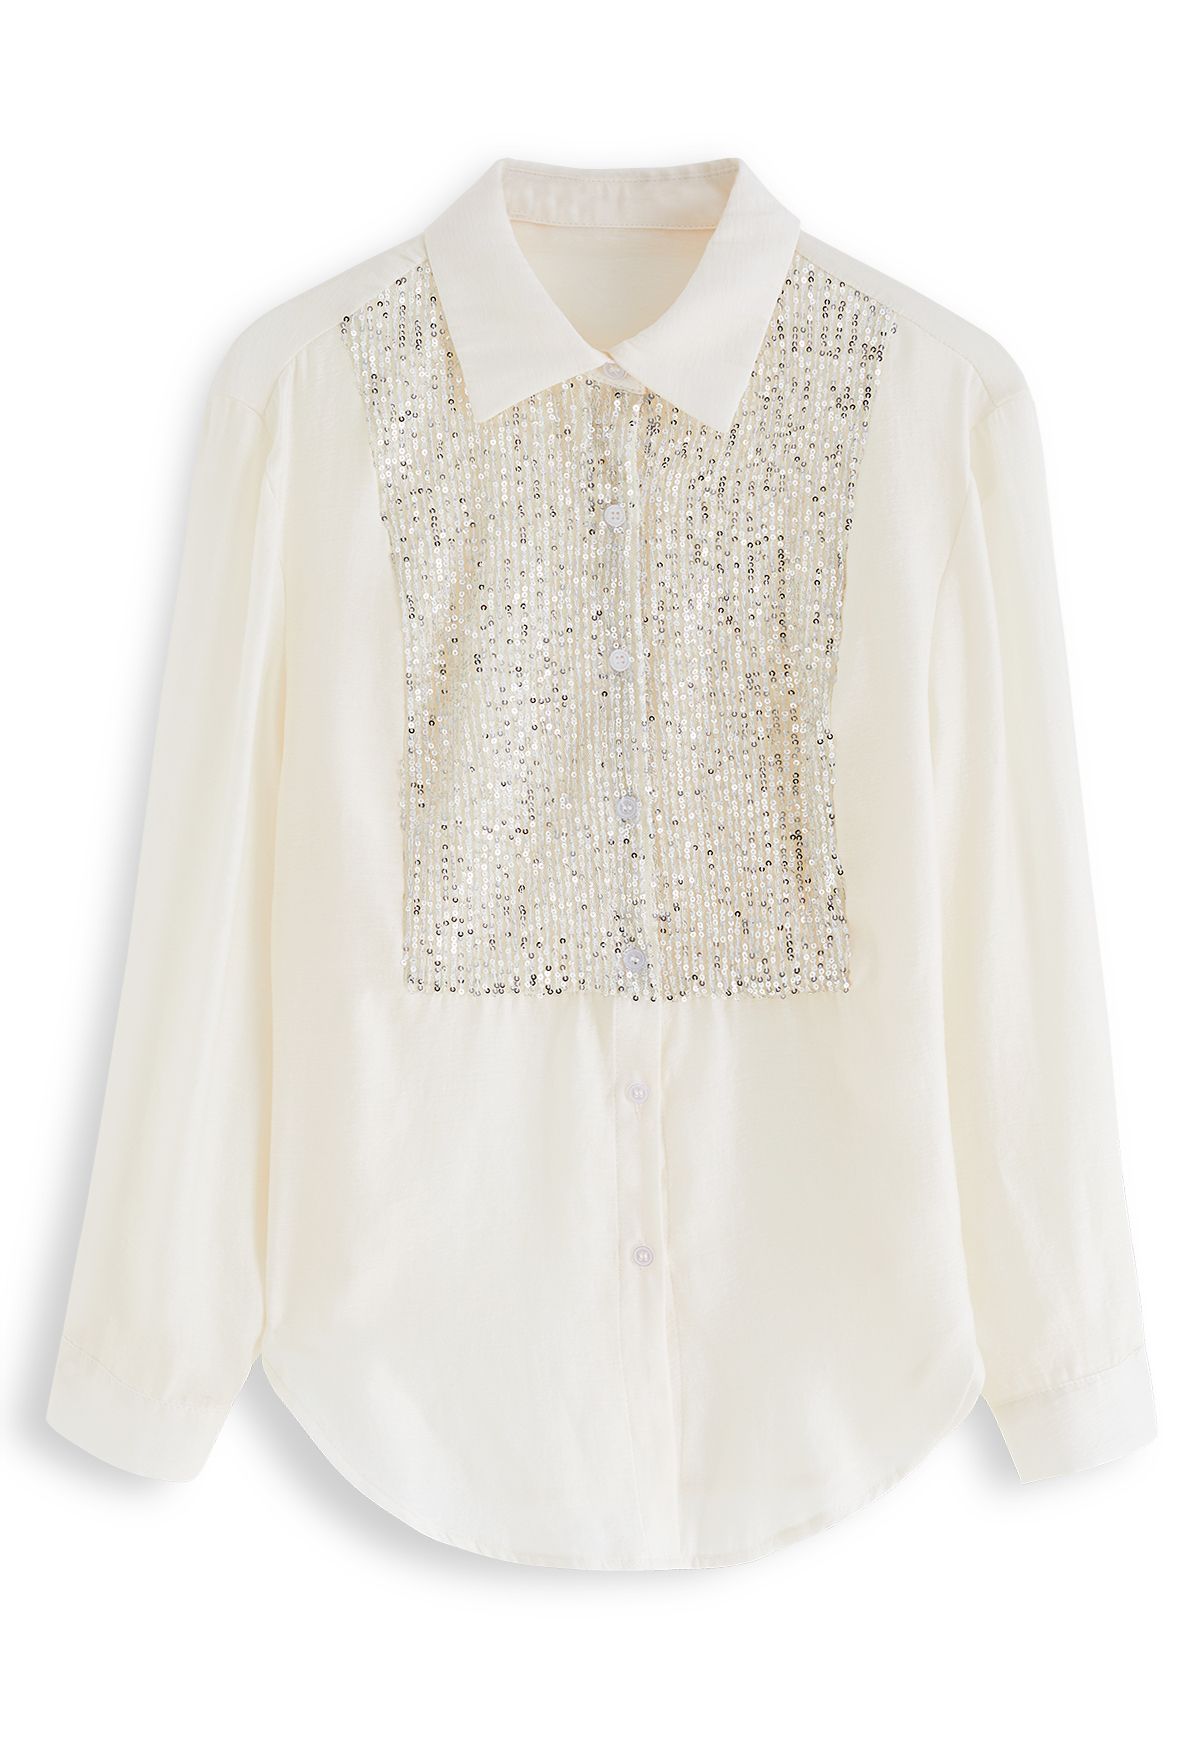 Sparkling Sequin Embellished Button Down Shirt in Cream